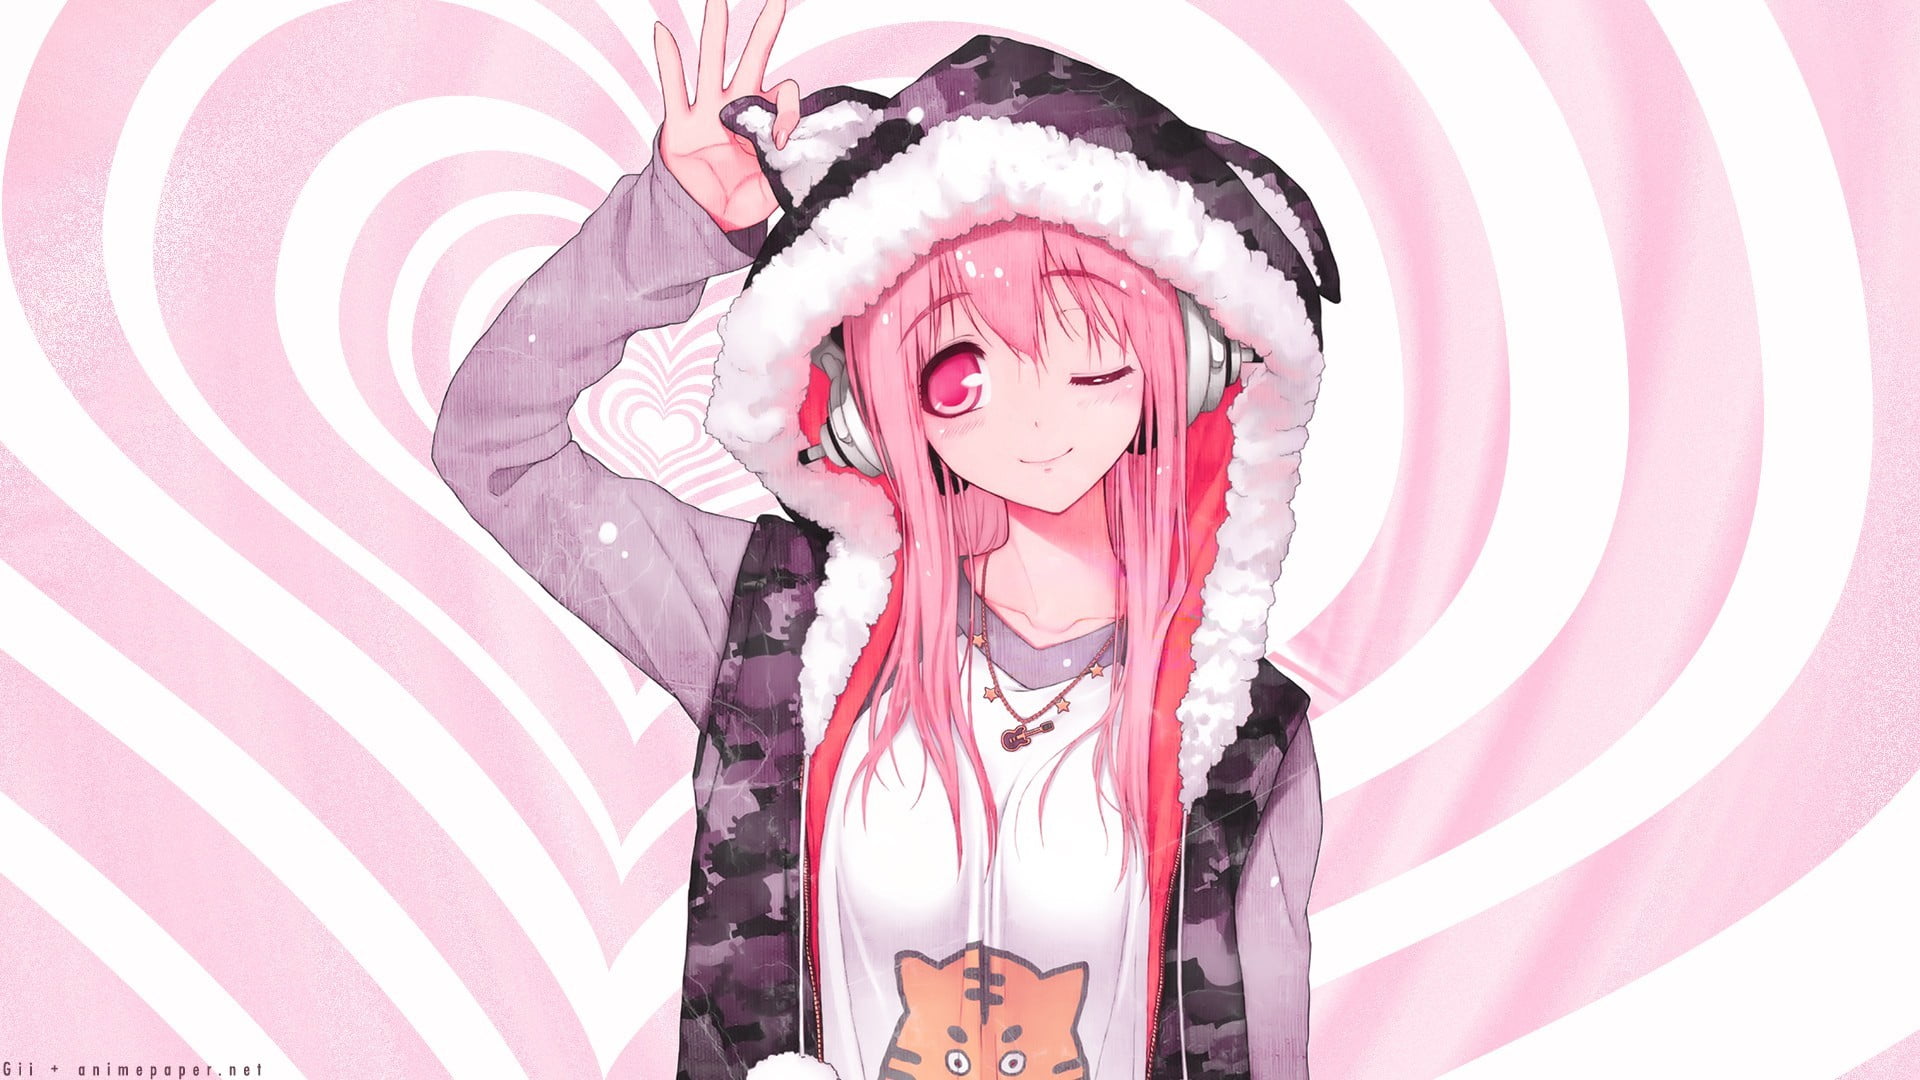 anime girls, Super Sonico, hoods, one person, pink color, front view